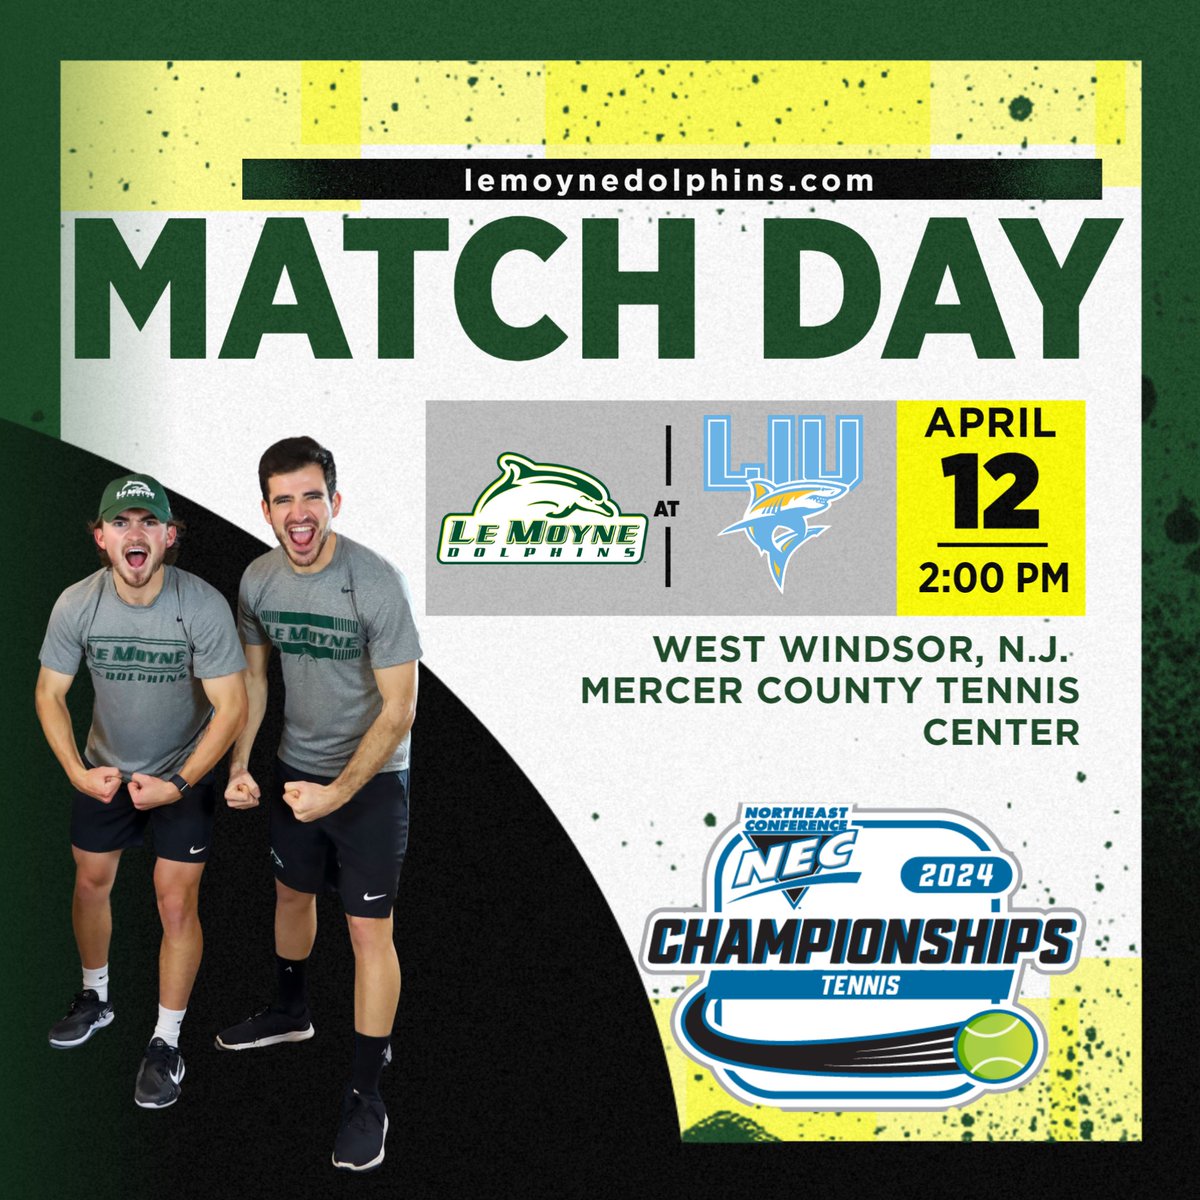 It's MATCH DAY!! and the quarterfinals of the NEC Championship! 🆚 LIU Sharks ⏰ 2:00 PM 🏟️ Mercer County Tennis Center - West Windsor, NJ